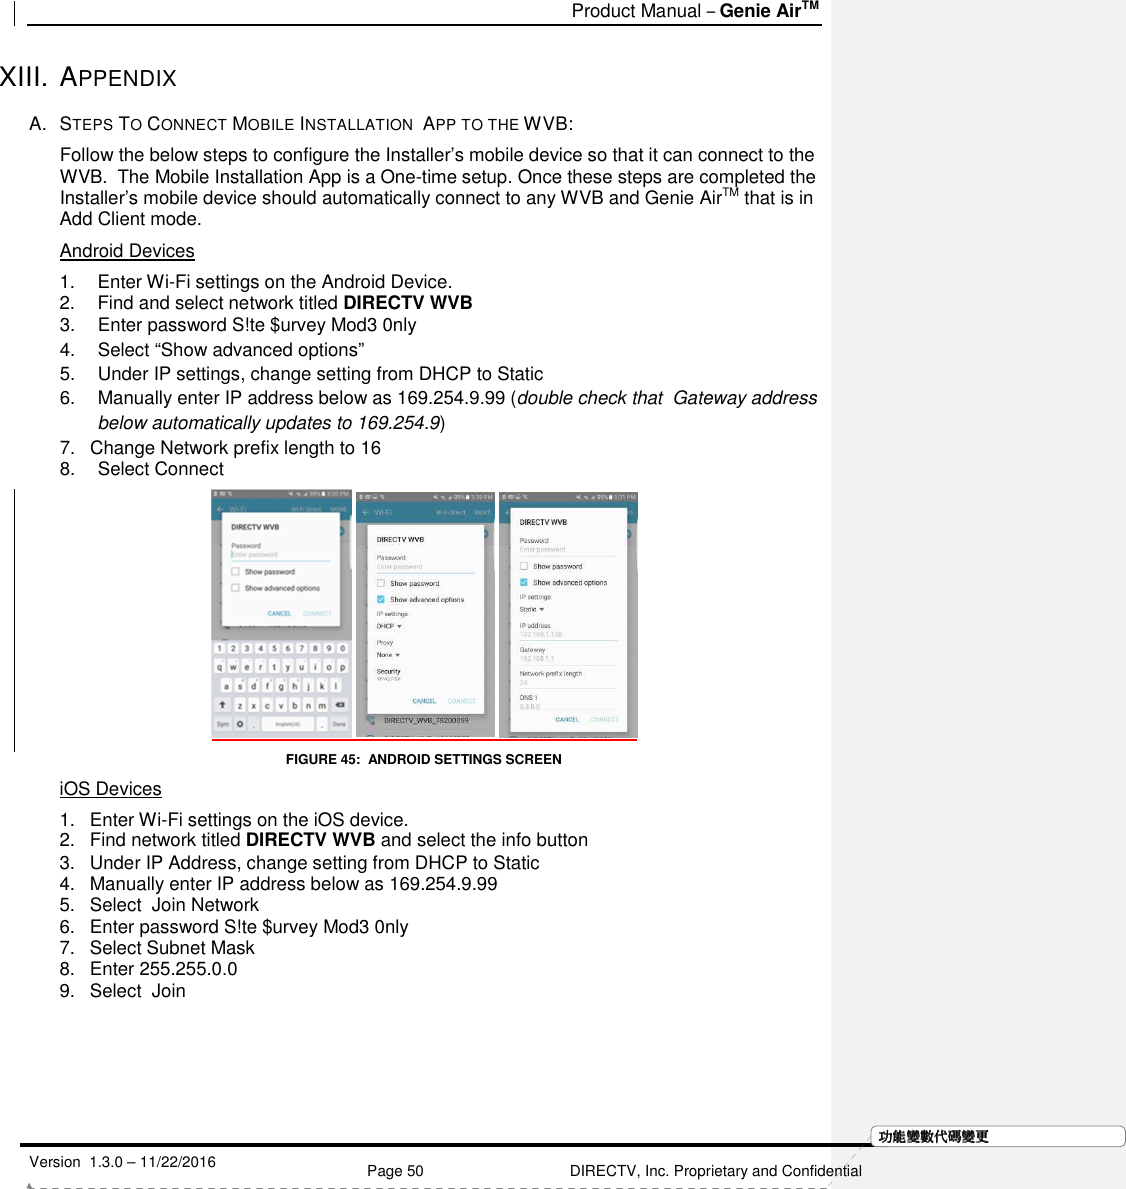   Product Manual – Genie AirTM   Version  1.3.0 – 11/22/2016    Page 50 DIRECTV, Inc. Proprietary and Confidential  功功功功能變能變能變能變數代數代數代數代碼變碼變碼變碼變更更更更XIII. APPENDIX A.  STEPS TO CONNECT MOBILE INSTALLATION  APP TO THE WVB:  Follow the below steps to configure the Installer’s mobile device so that it can connect to the WVB.  The Mobile Installation App is a One-time setup. Once these steps are completed the Installer’s mobile device should automatically connect to any WVB and Genie AirTM that is in Add Client mode. Android Devices 1.  Enter Wi-Fi settings on the Android Device. 2.  Find and select network titled DIRECTV WVB 3.  Enter password S!te $urvey Mod3 0nly 4.  Select “Show advanced options” 5.  Under IP settings, change setting from DHCP to Static 6.  Manually enter IP address below as 169.254.9.99 (double check that  Gateway address below automatically updates to 169.254.9) 7.  Change Network prefix length to 16 8.  Select Connect      FIGURE 45:  ANDROID SETTINGS SCREEN iOS Devices 1.  Enter Wi-Fi settings on the iOS device. 2.  Find network titled DIRECTV WVB and select the info button 3.  Under IP Address, change setting from DHCP to Static 4.  Manually enter IP address below as 169.254.9.99 5.  Select  Join Network 6.  Enter password S!te $urvey Mod3 0nly 7.  Select Subnet Mask 8.  Enter 255.255.0.0 9.  Select  Join 